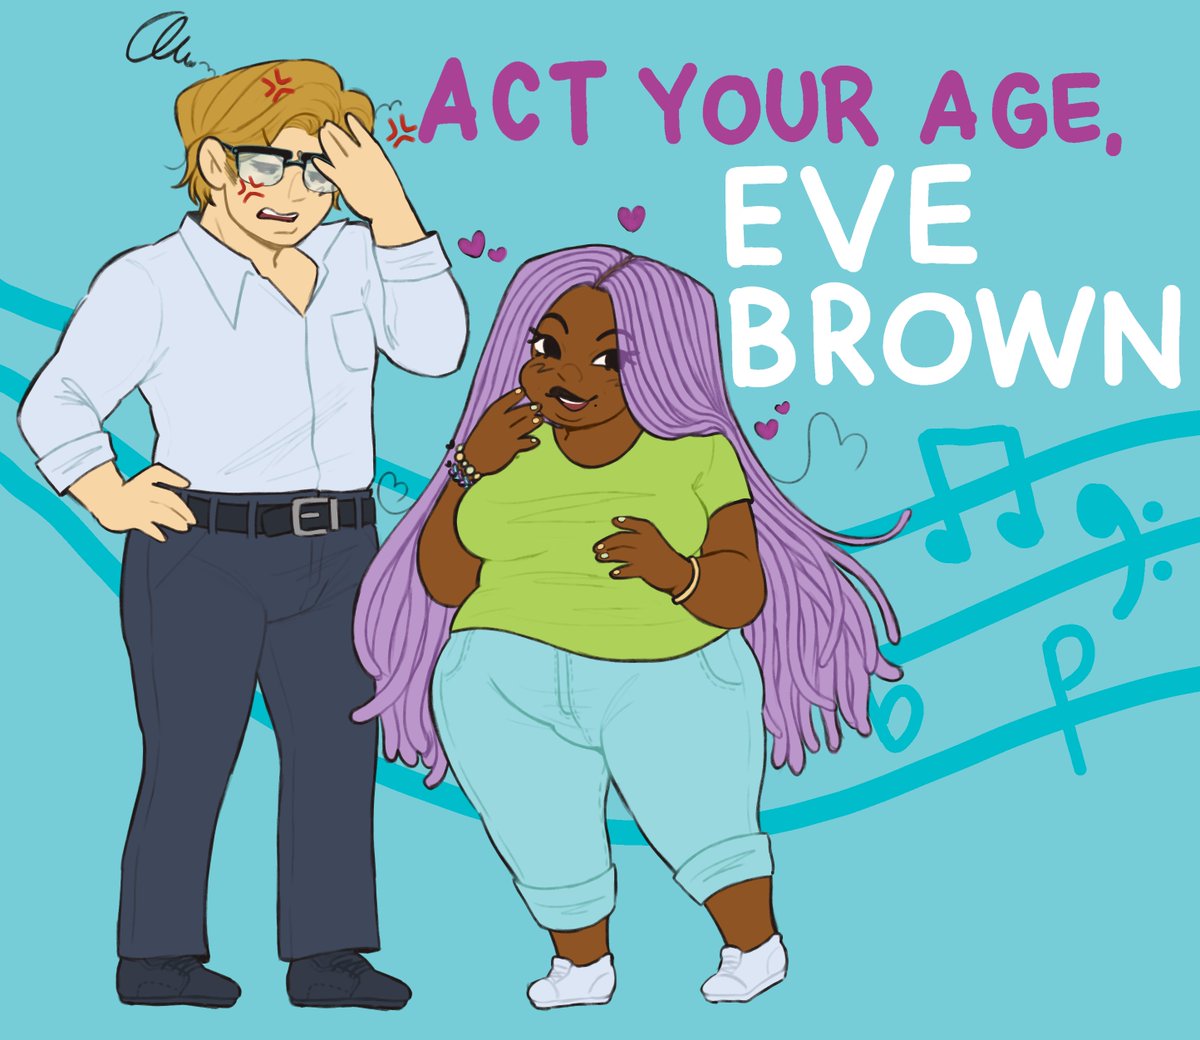 fanart I'm never gonna finish so putting it here. this was a good book
#actyourageevebrown
#taliahibbert 
#brownsisters